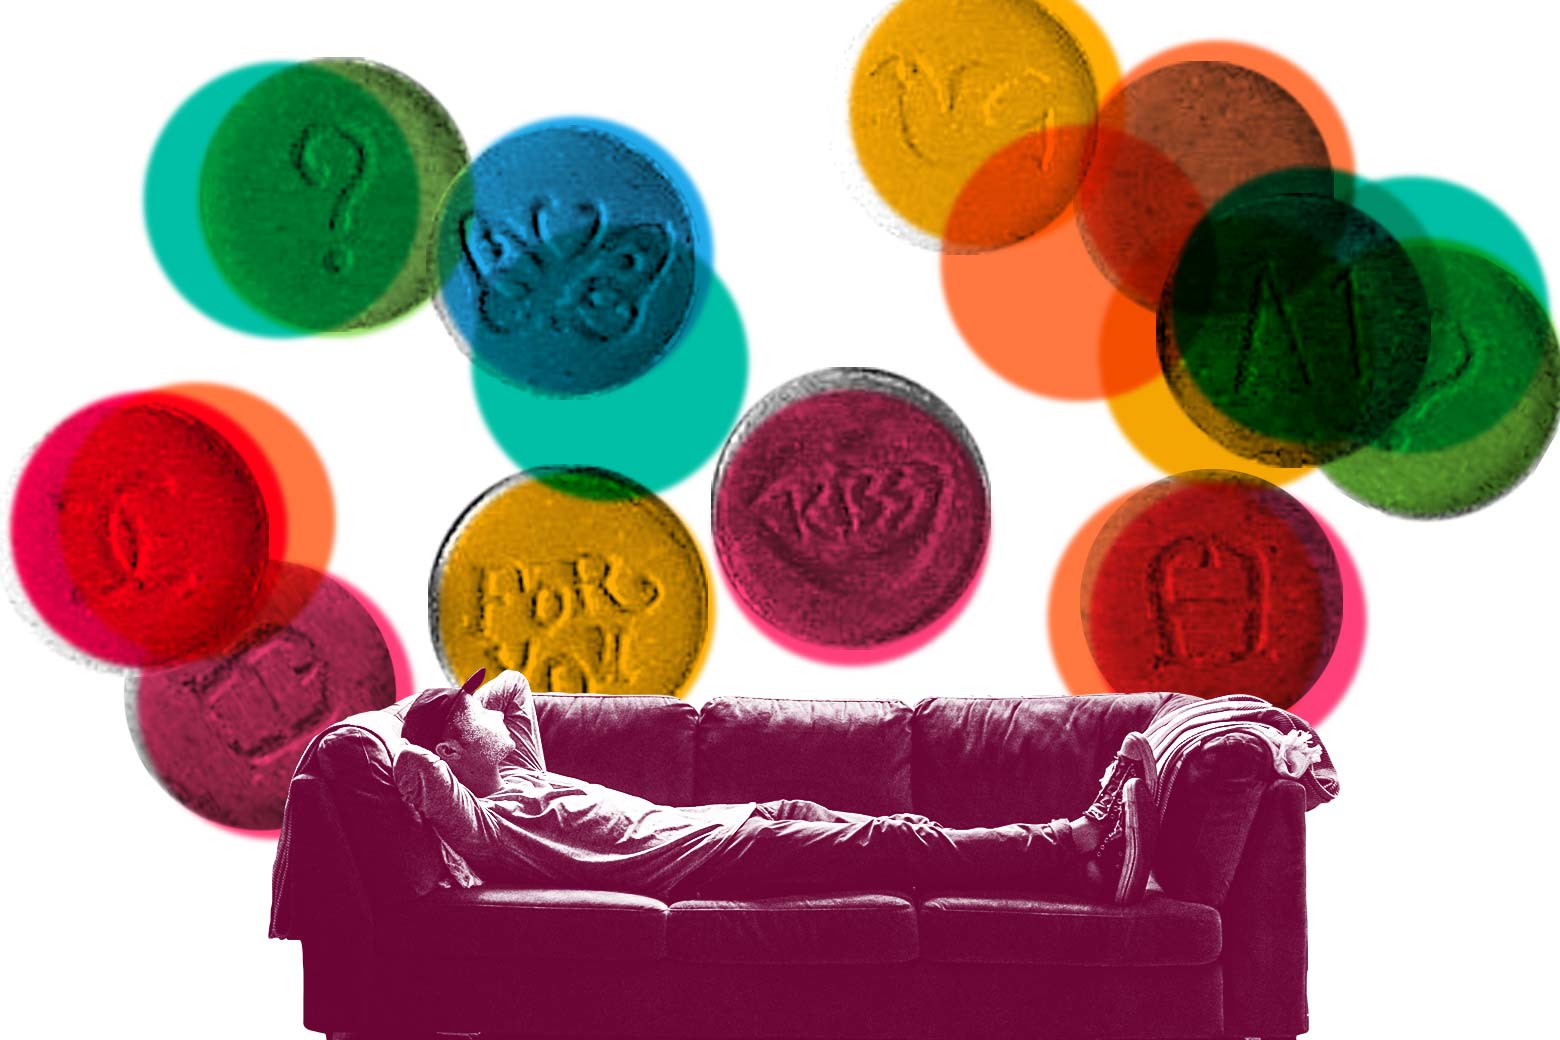 Photo illustration: A person lies on a couch while various colored pills with symbols float above the couch.